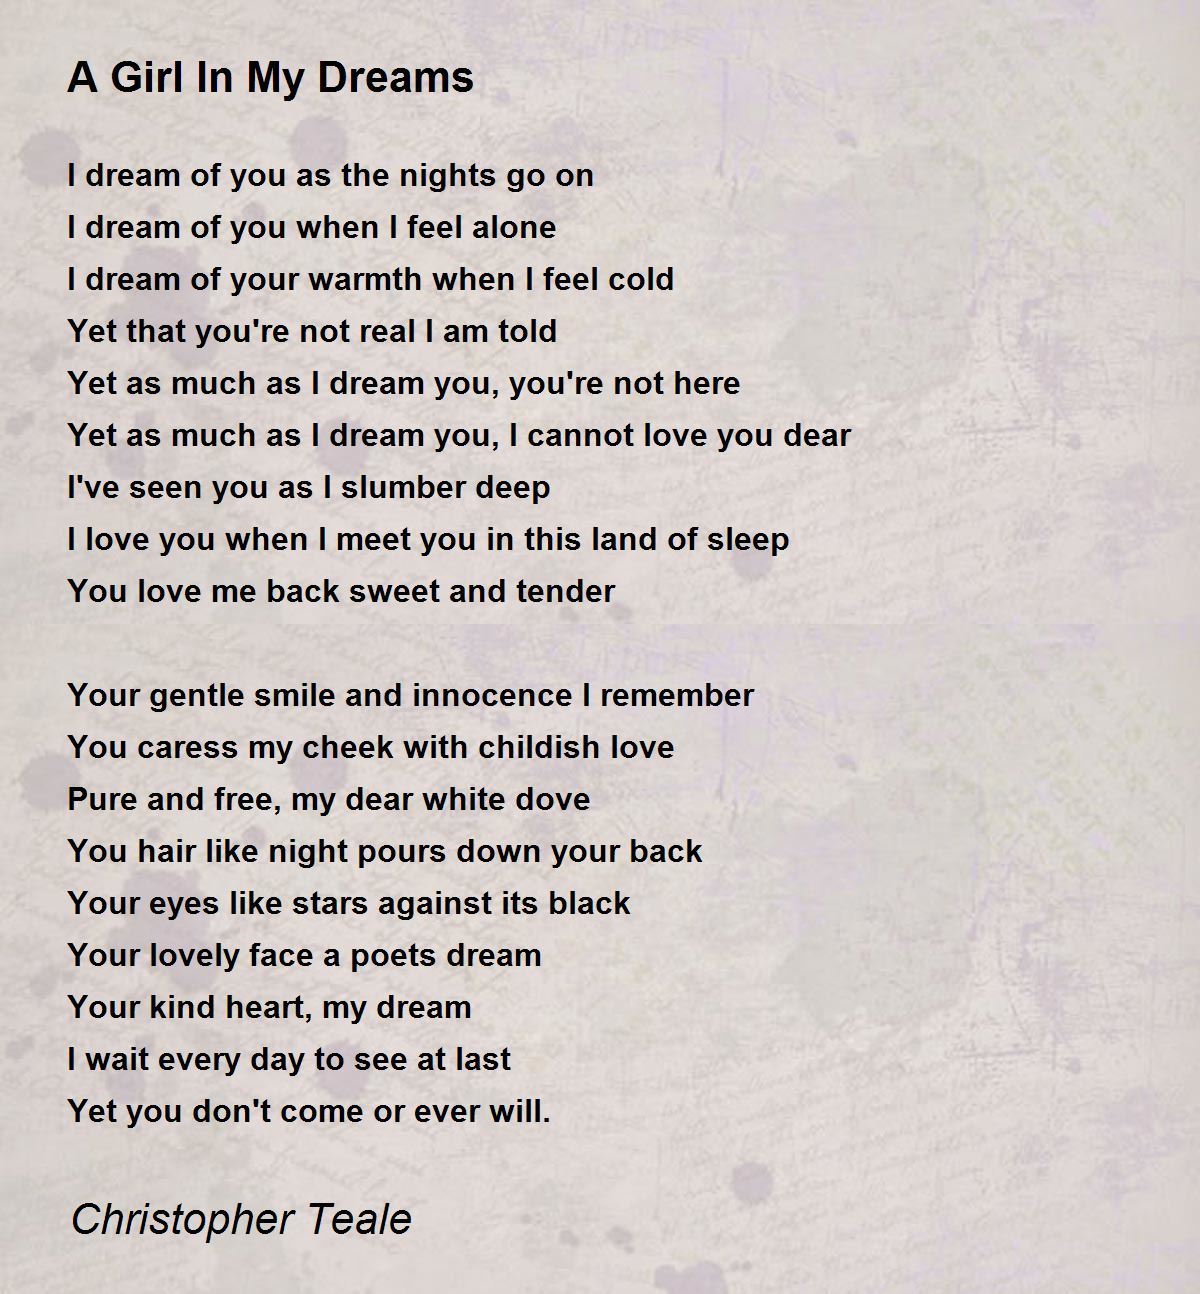 A Girl In My Dreams - A Girl In My Dreams Poem by Christopher Teale